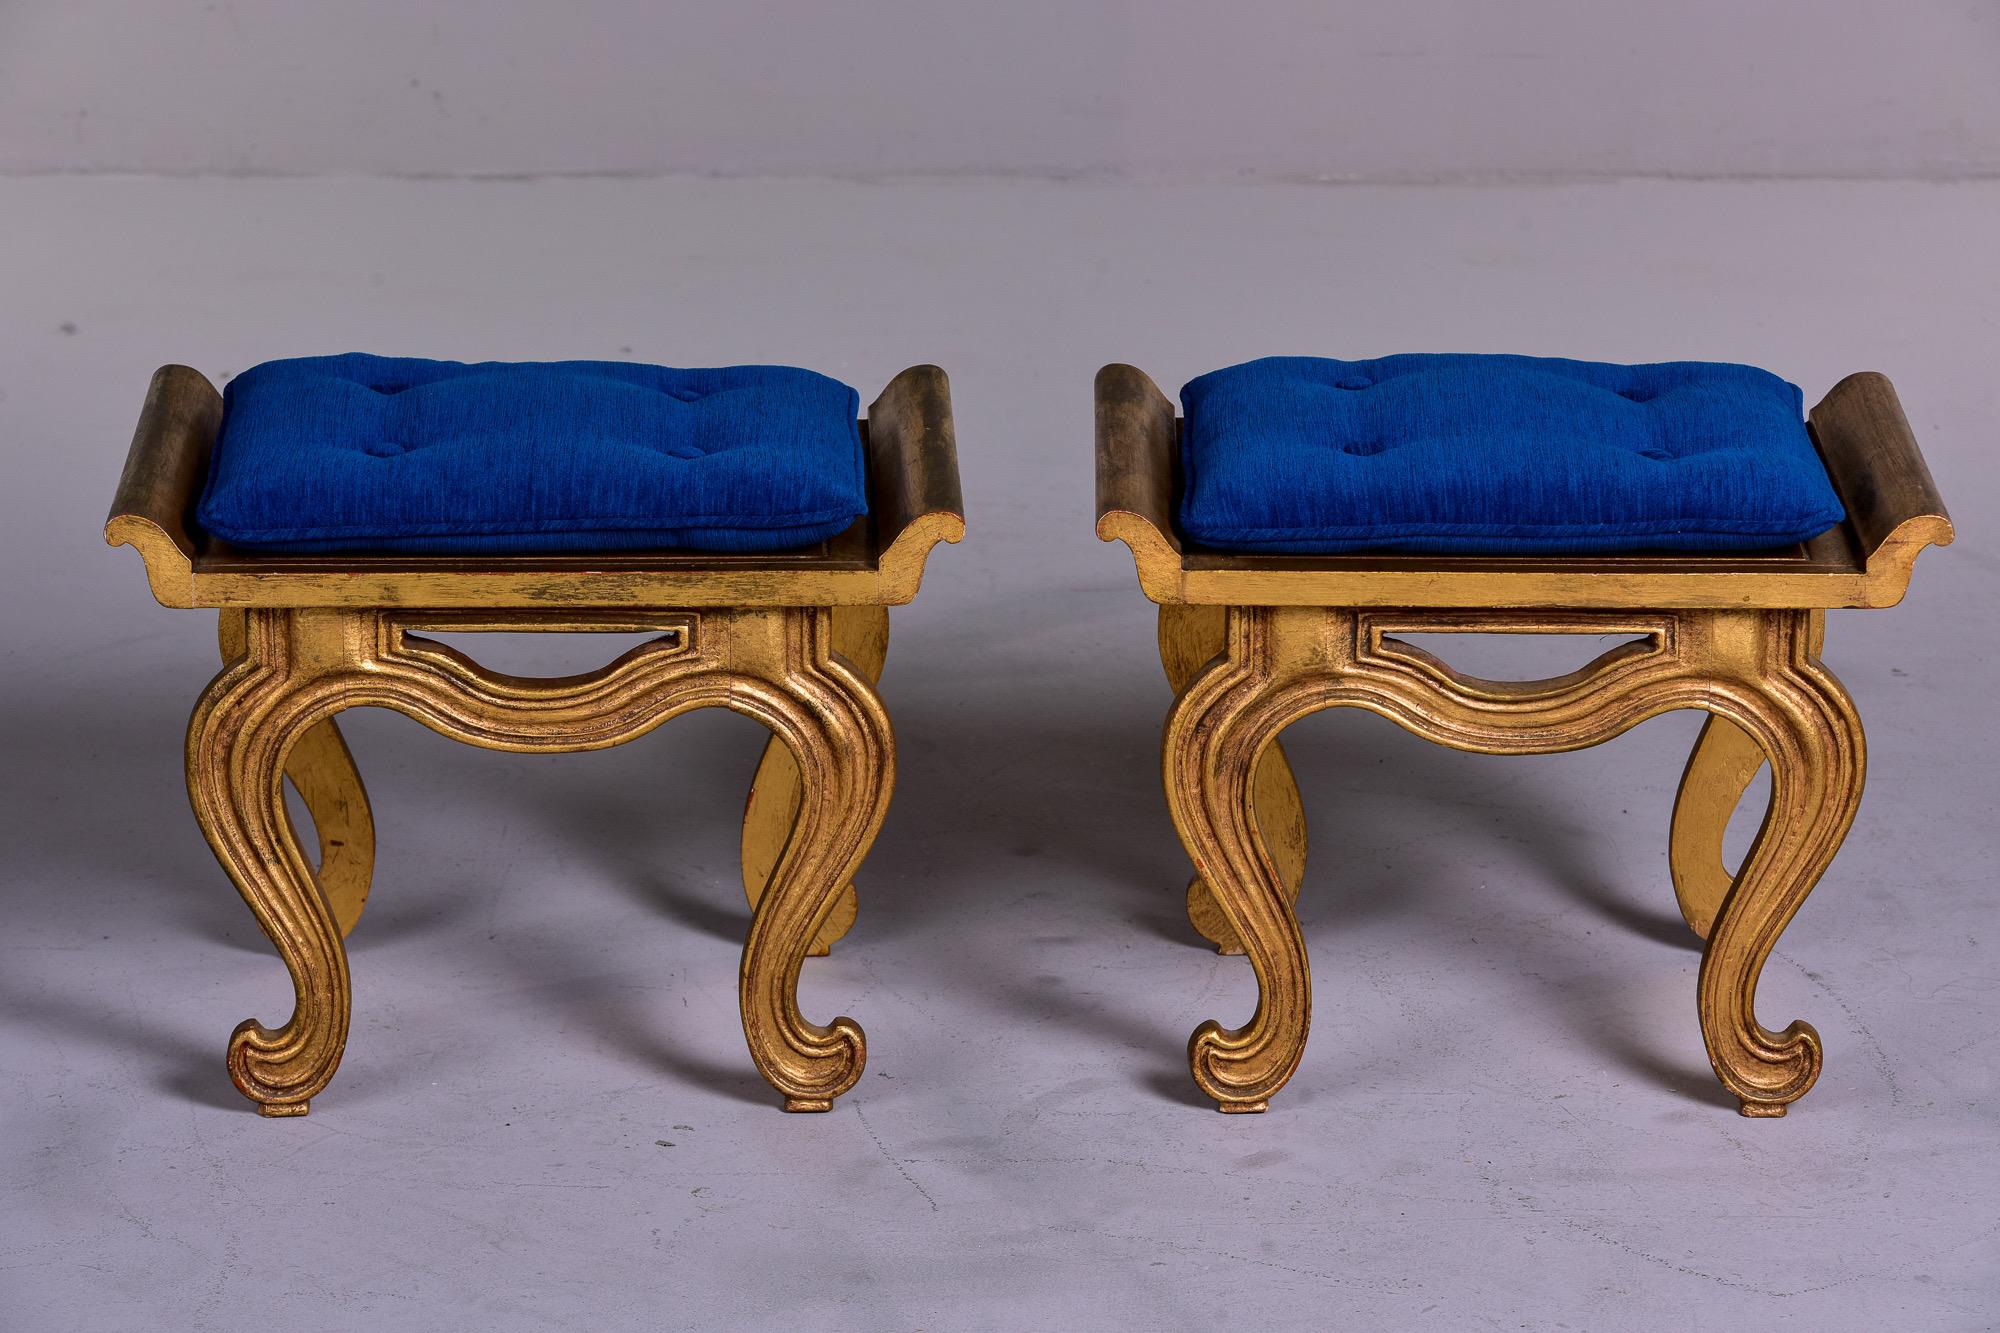 Circa 1960s pair of Asian style wood stools or side tables with gilded finish. We had removable tufted cushions made in peacock blue chenille velvet. Unknown maker. Found in the US. Sold and priced as a pair. 

Seat height: 14” without cushions -